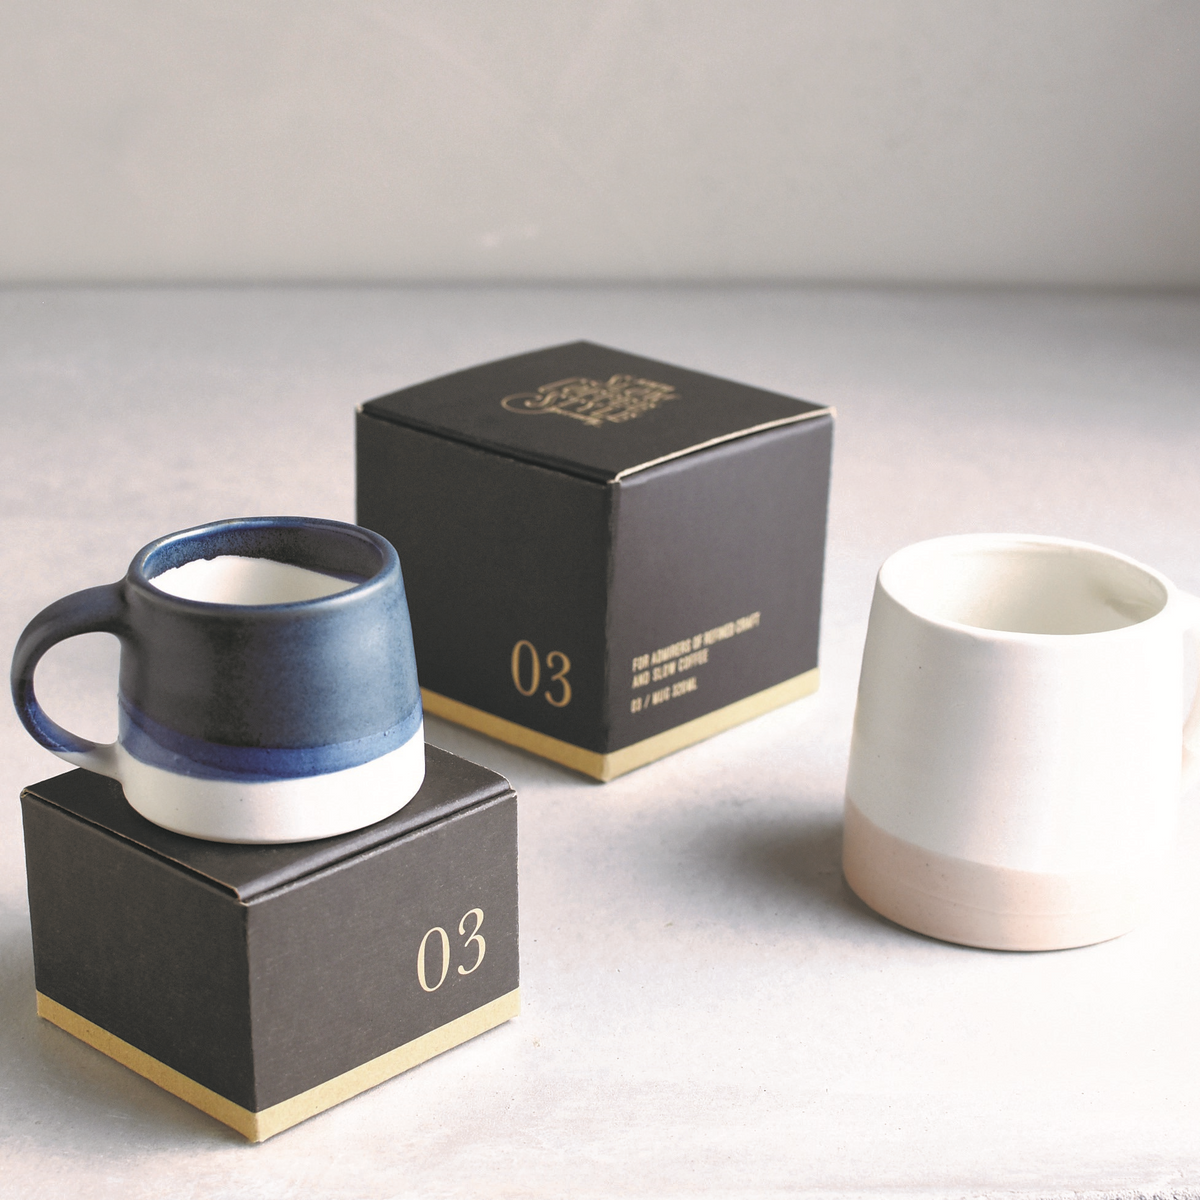 Black and Gold Packaging for Kinto SCS-S03 Mug.